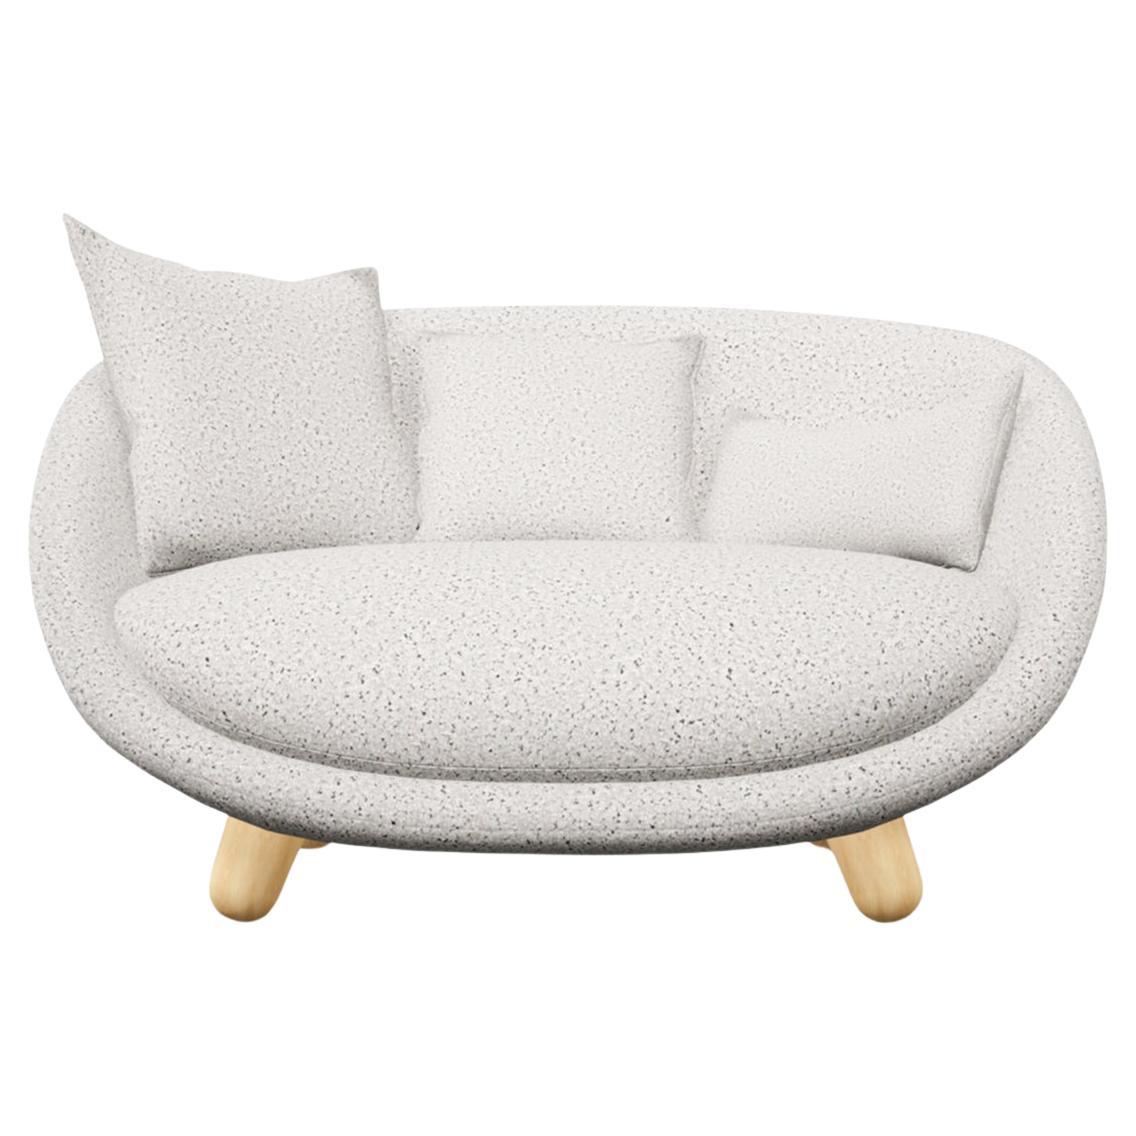 Moooi Love Sofa in Dodo Pavone Jacquard Upholstery & White Wash Stained Legs For Sale